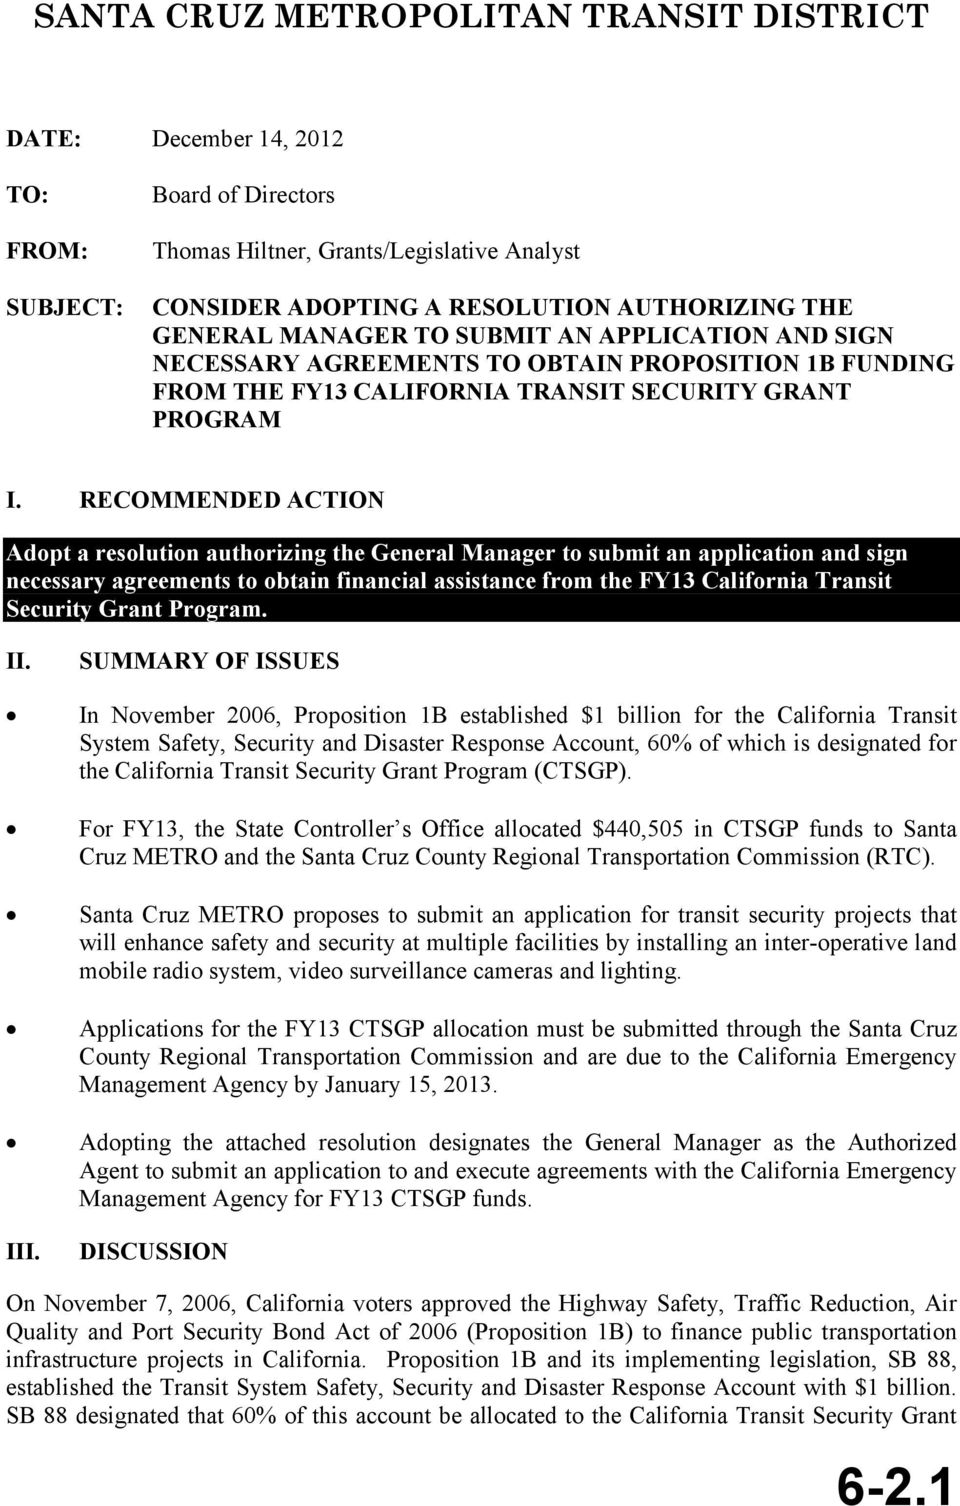 RECOMMENDED ACTION Adopt a resolution authorizing the General Manager to submit an application and sign necessary agreements to obtain financial assistance from the FY13 California Transit Security